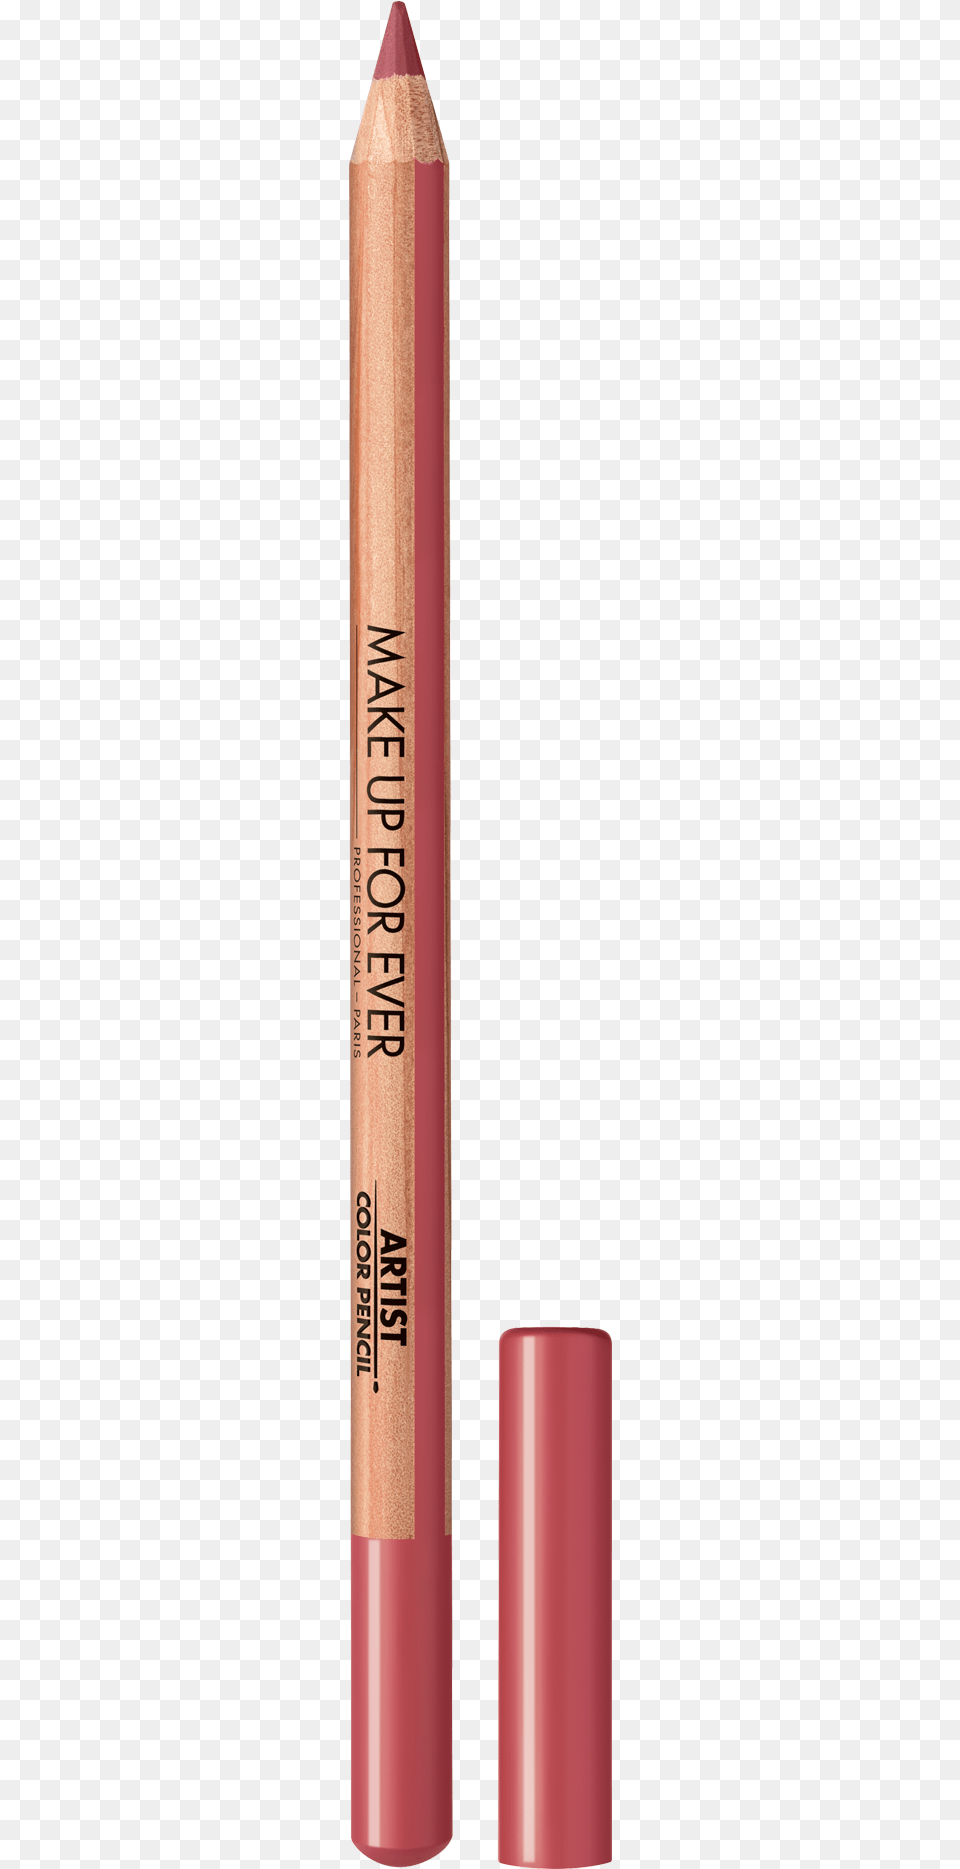 Make Up For Ever Artist Color Pencil, Cosmetics, Lipstick Free Png